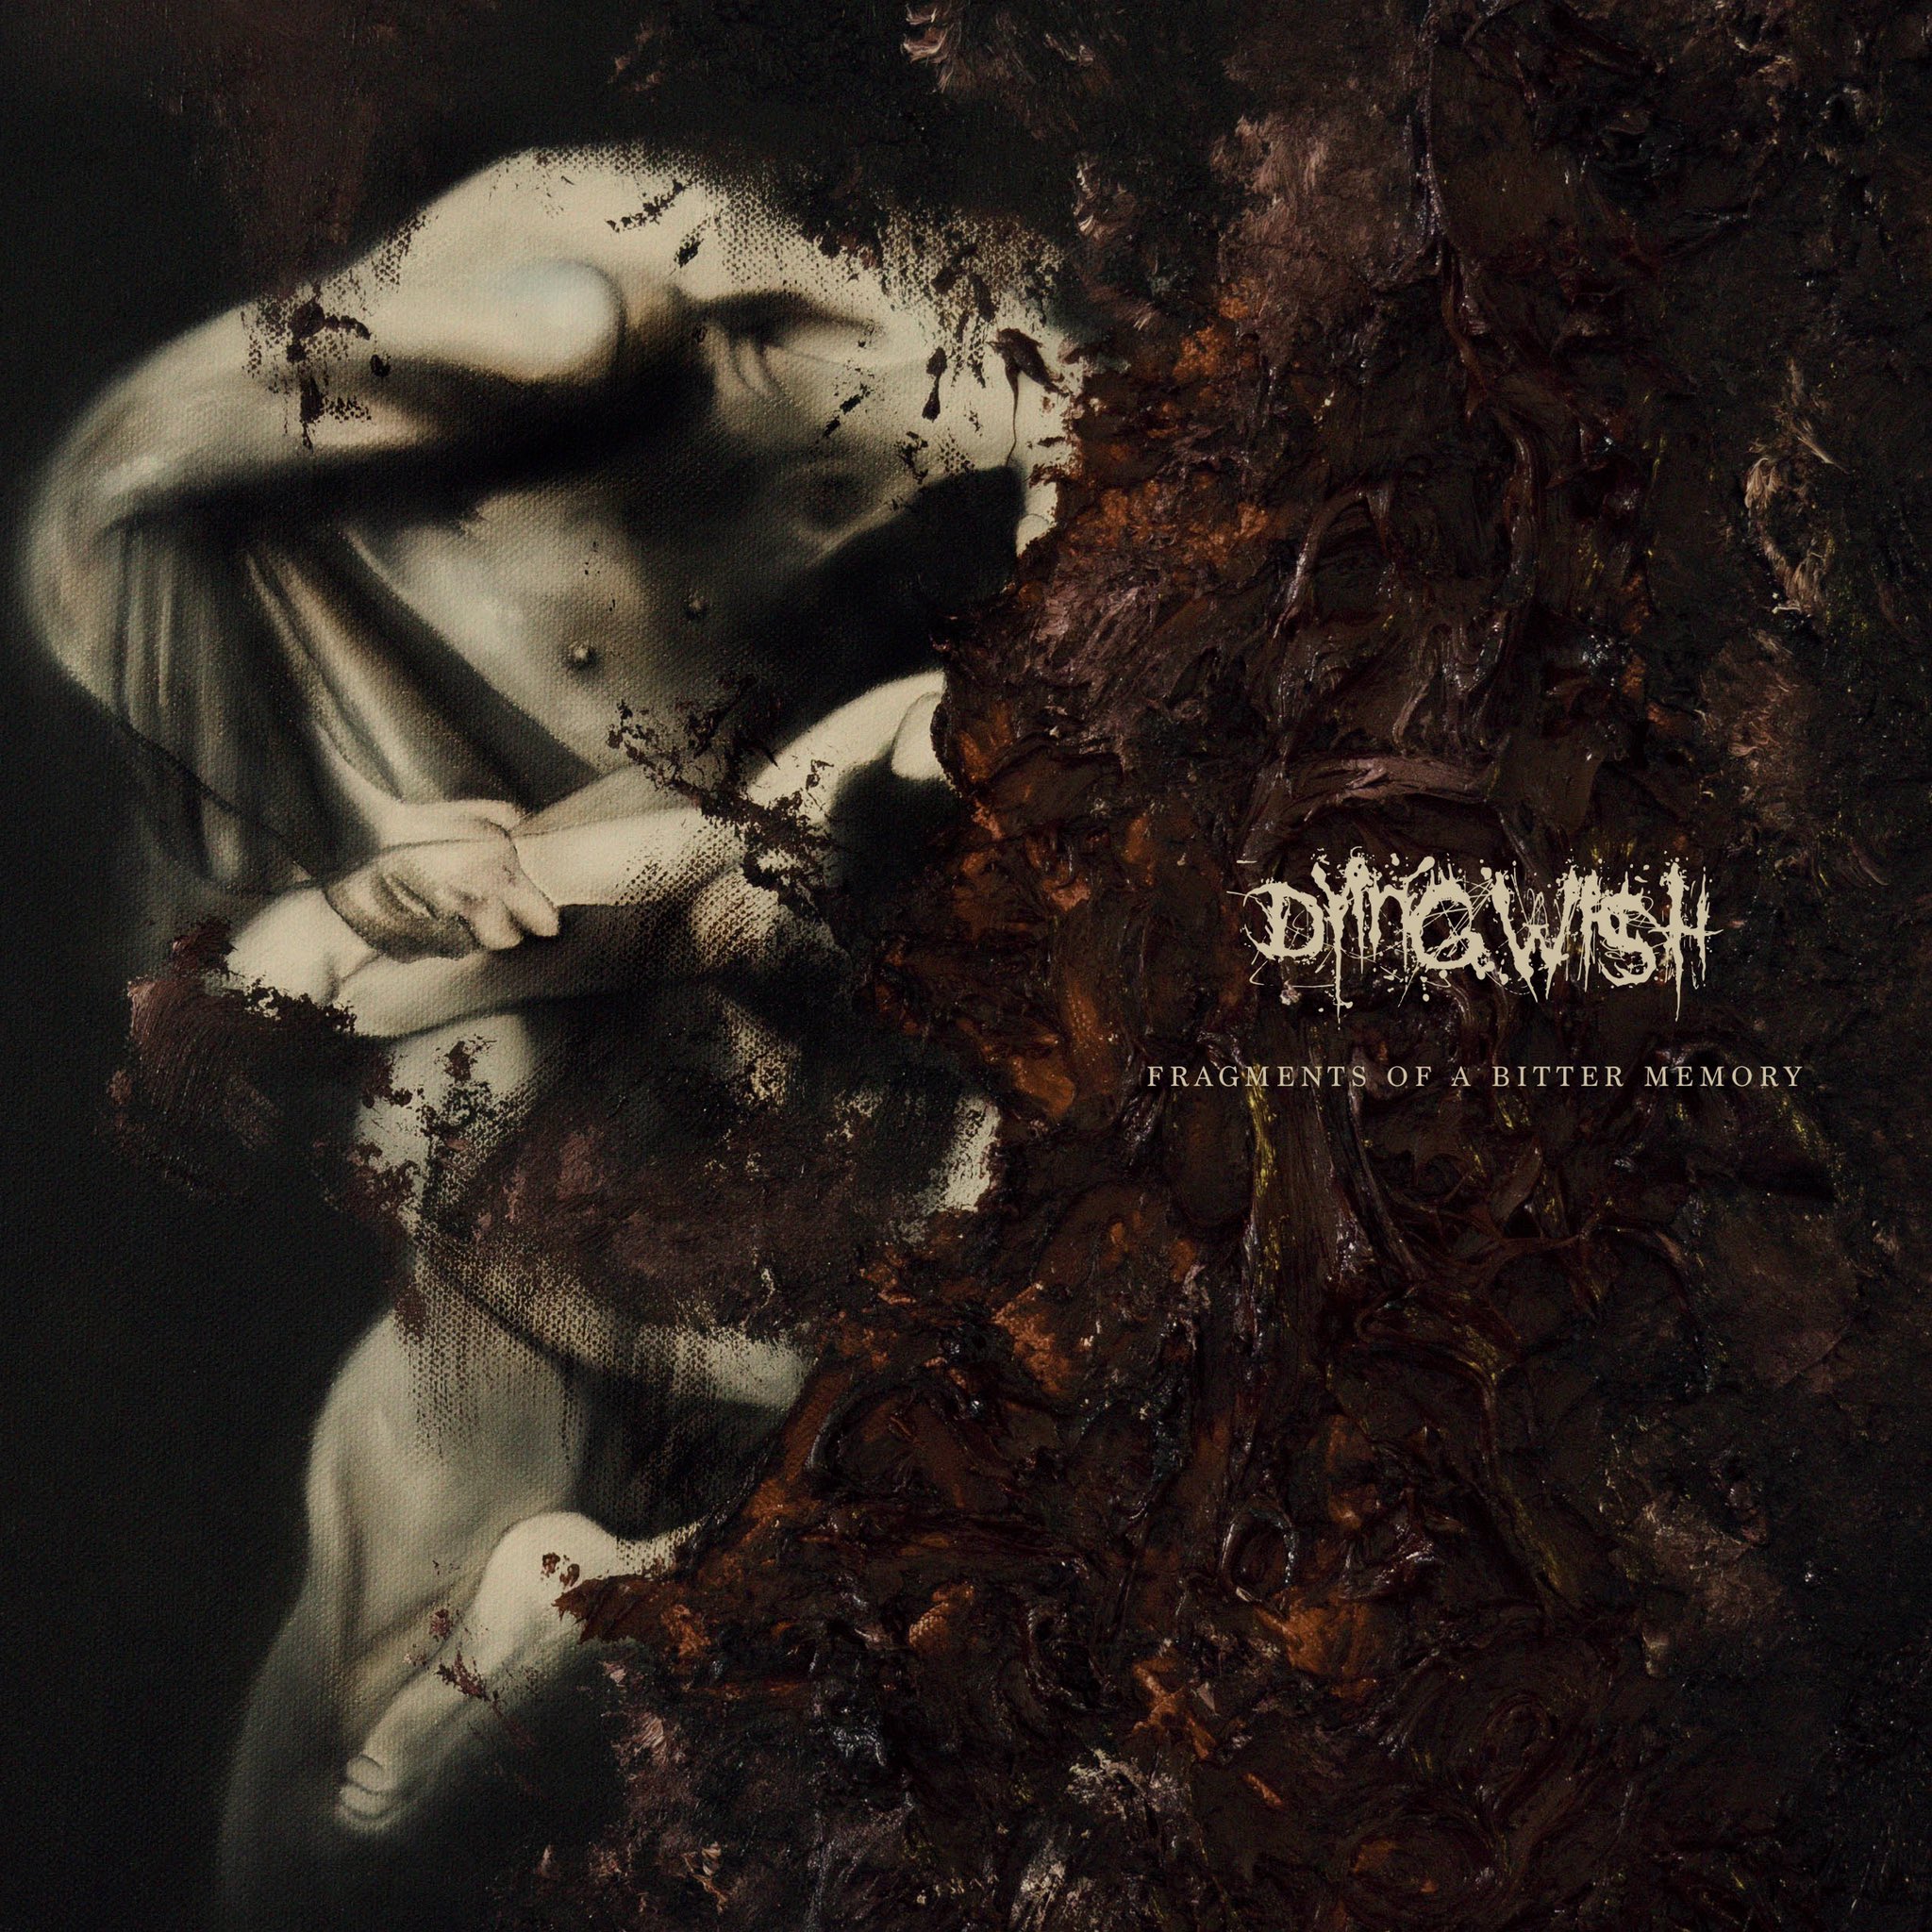 Dying Wish on Twitter: "Our debut LP “Fragments of a Bitter Memory” will be  released October 1st, 2021 on @sharptonerecs. Title track comes out  tomorrow. Produced, Mixed and Mastered by @randyleboeuf Cover